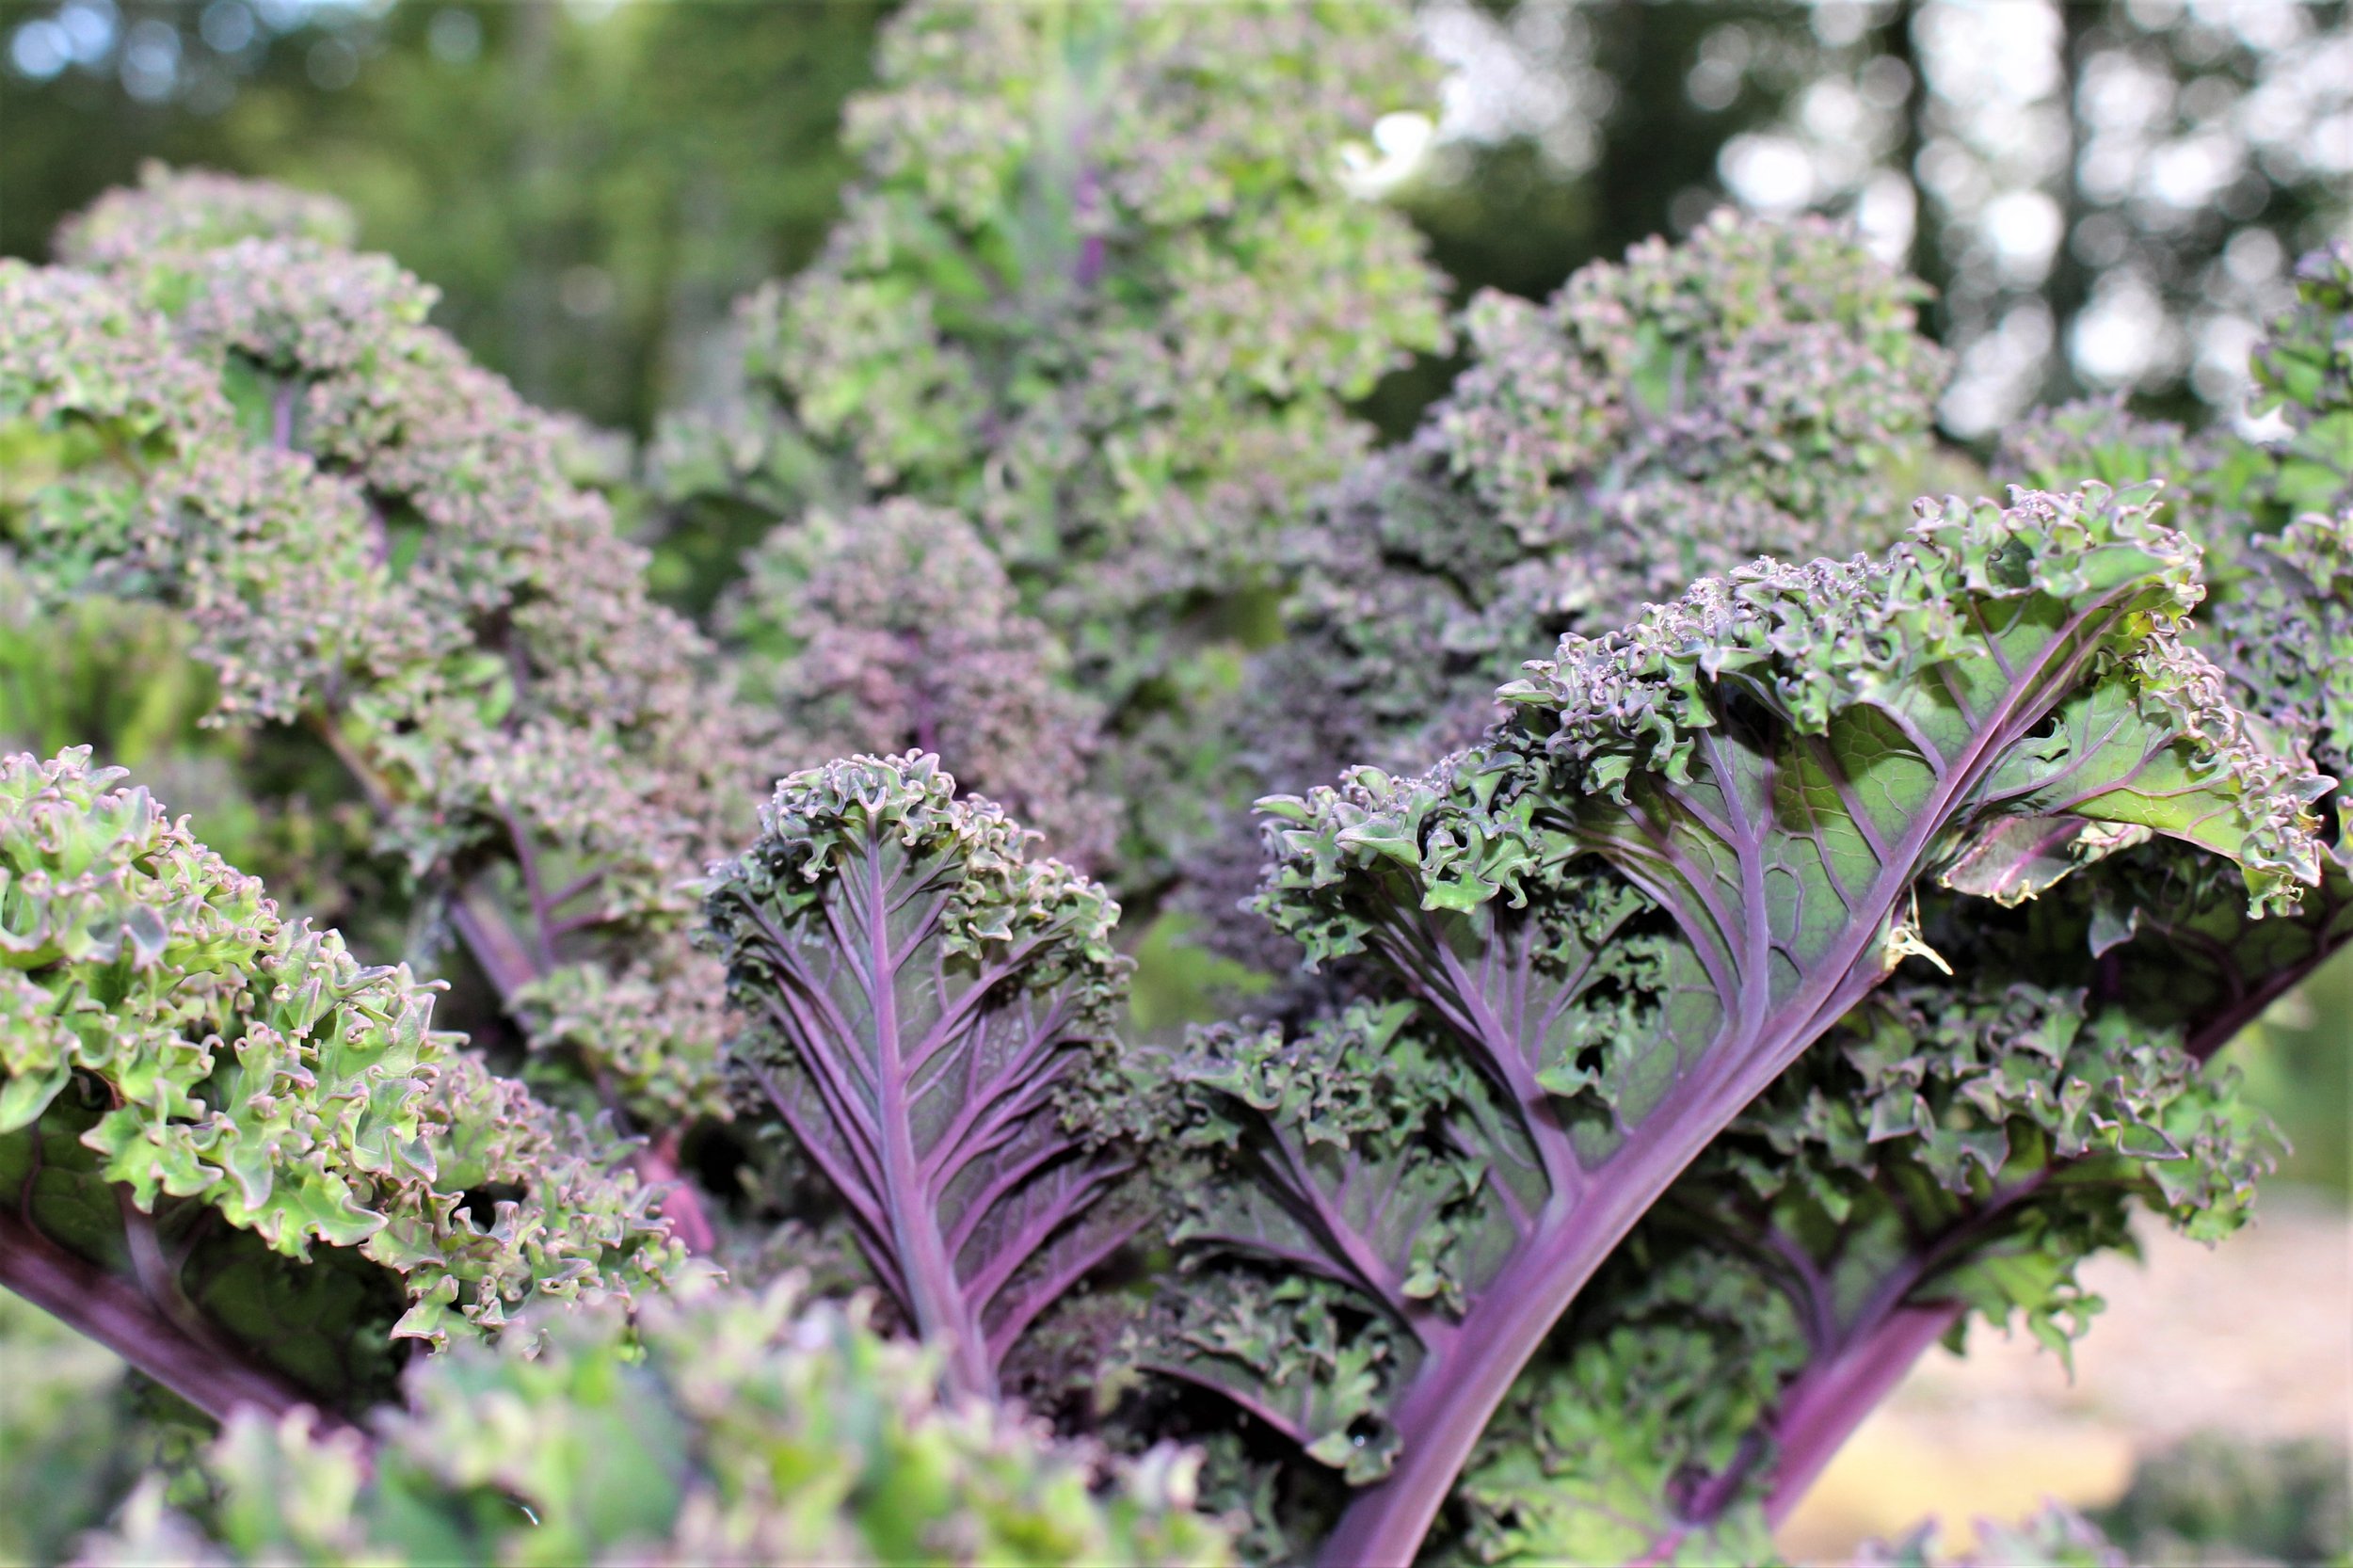 Baltic Red Kale